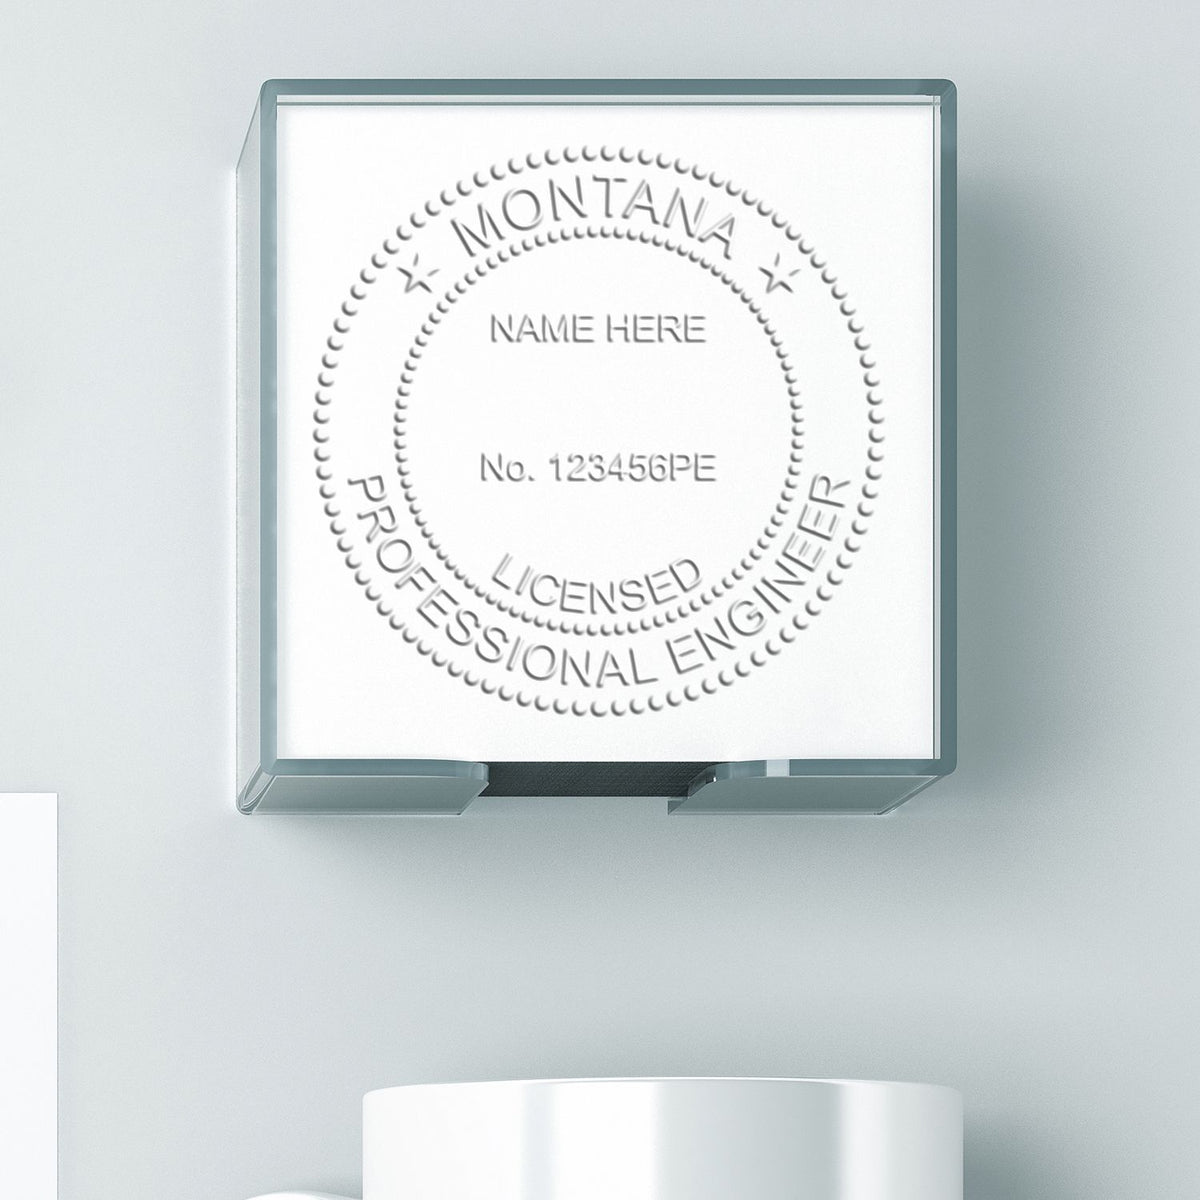 This paper is stamped with a sample imprint of the Soft Montana Professional Engineer Seal, signifying its quality and reliability.